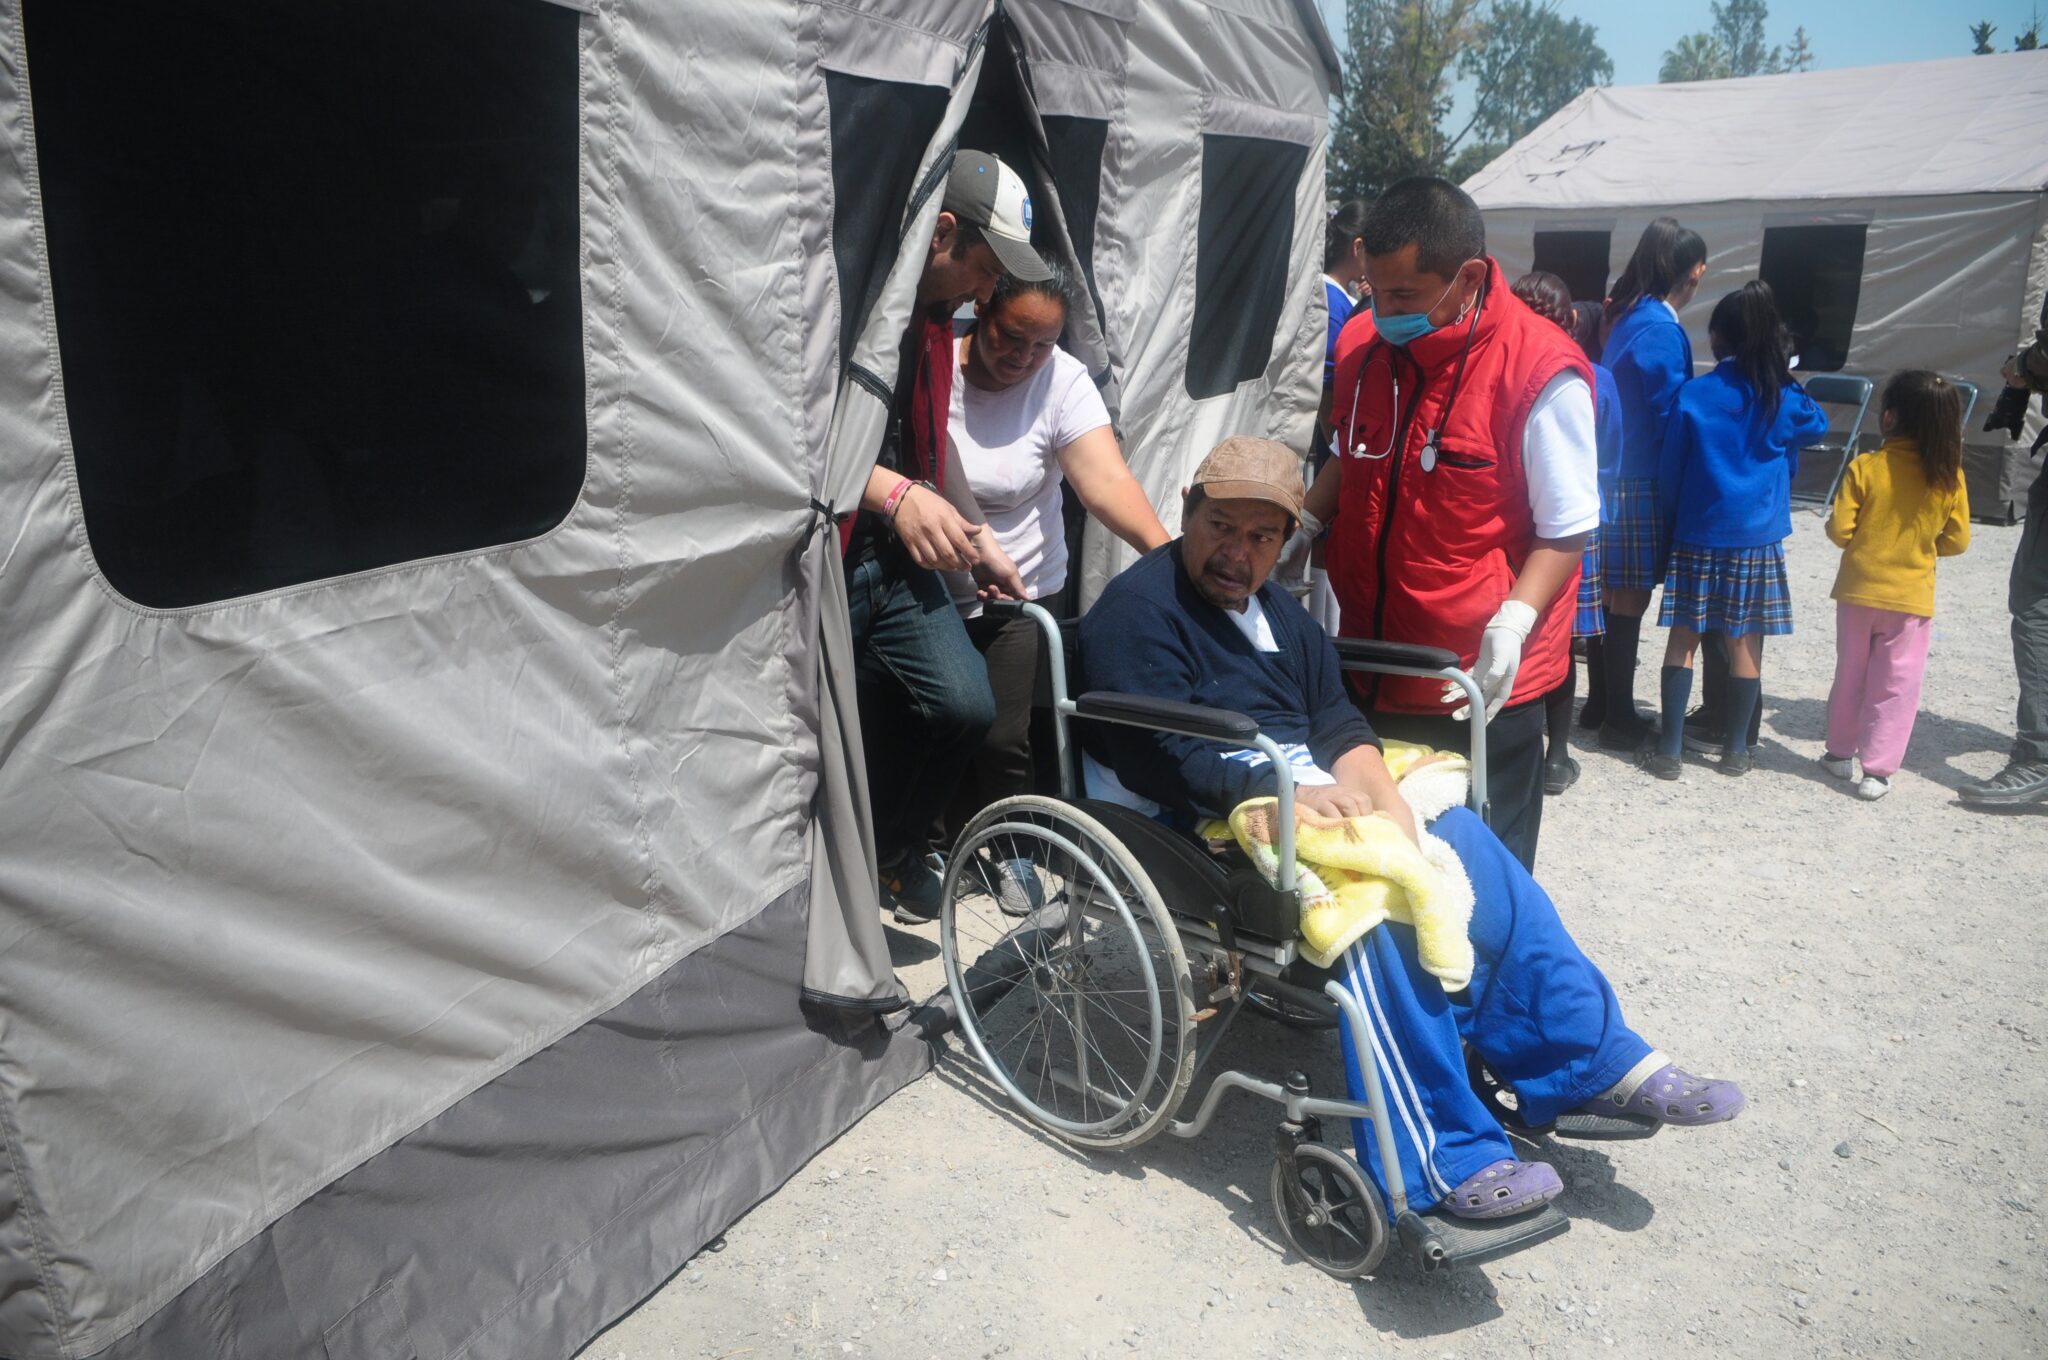 A man is helped into a mobile health clinic tent by family and staff. Photo by Direct Relief/Lara Cooper